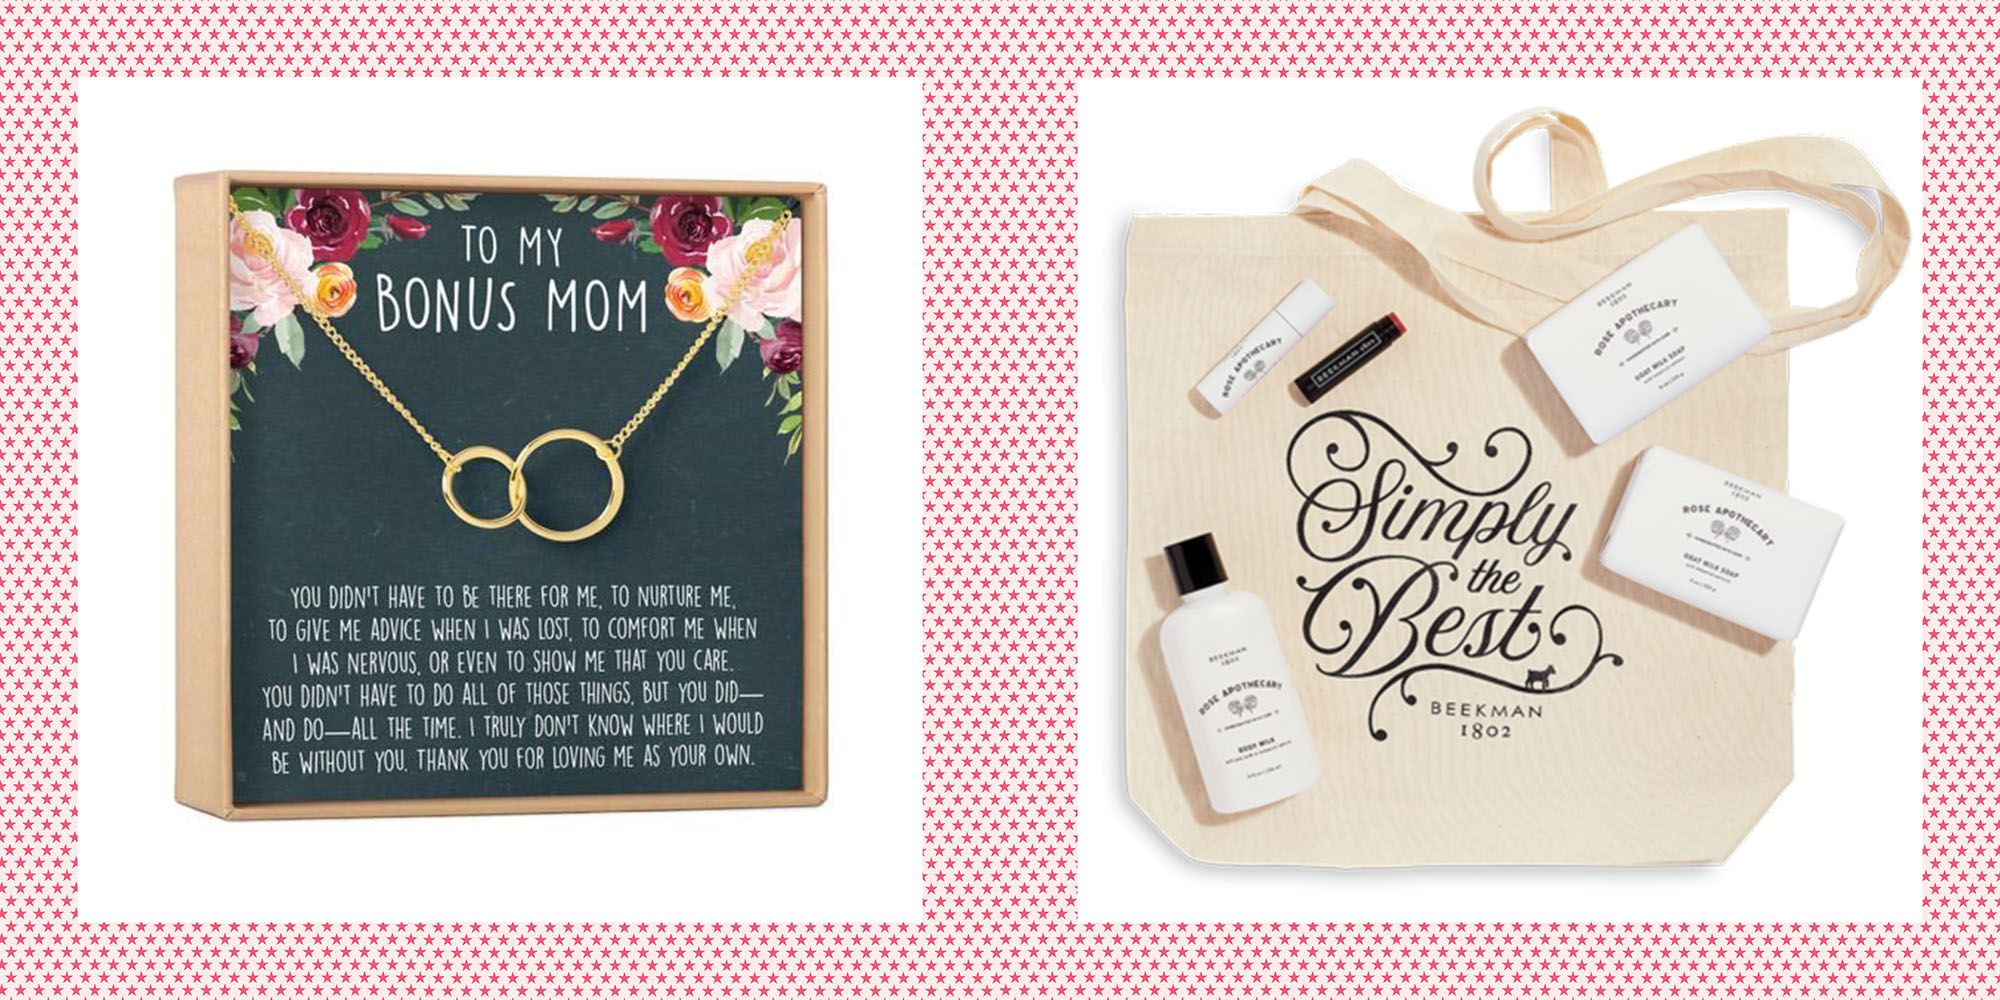 Special Stepmom Gifts, Not A Stepmom, A Second Mom, Cute Mother's